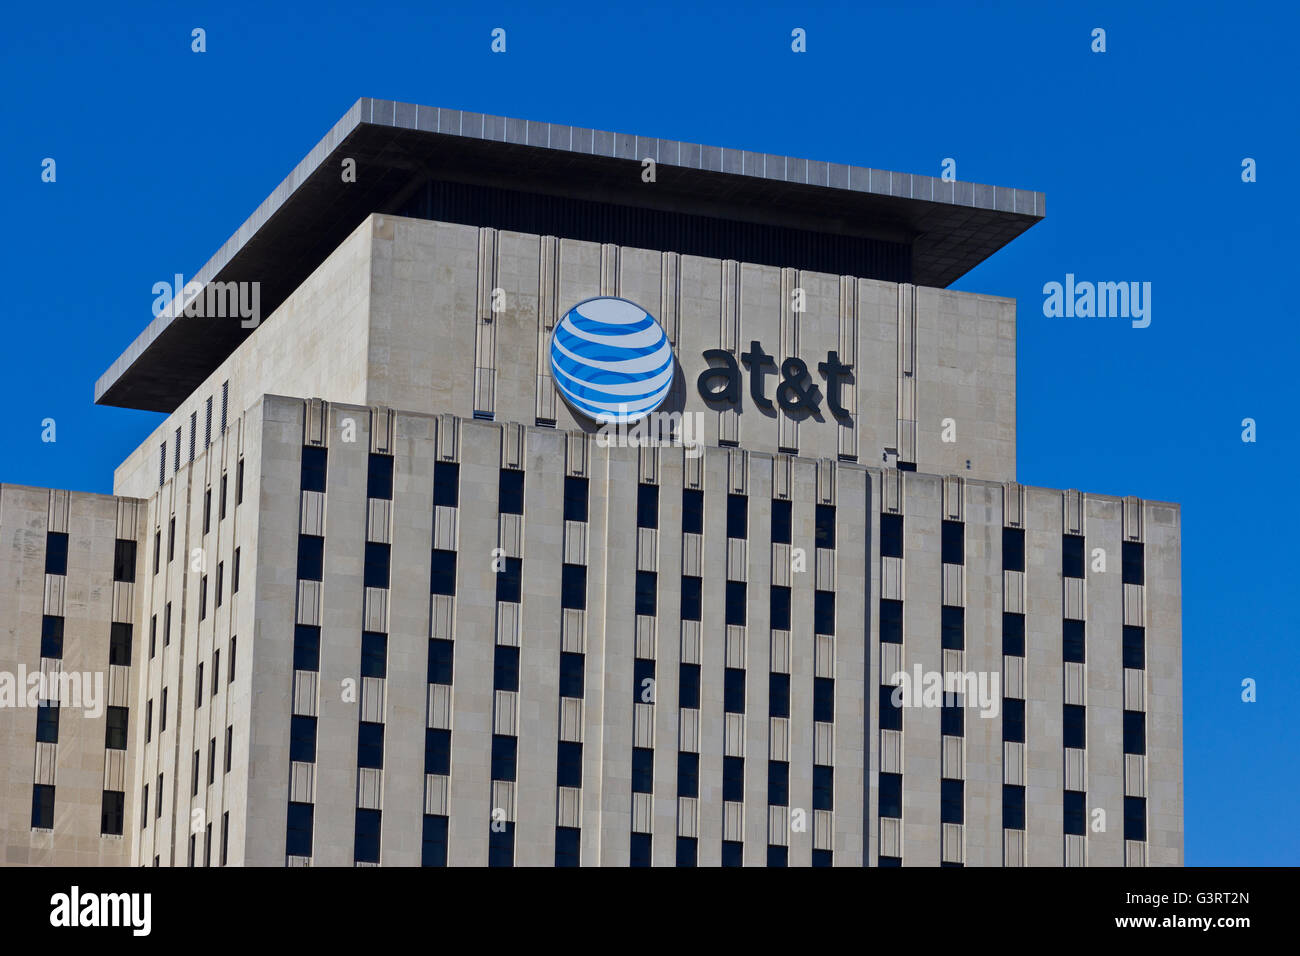 Indianapolis - Circa March 2016: AT&T Indiana Headquarters. AT&T Inc. is an American Telecommunications Corporation VI Stock Photo